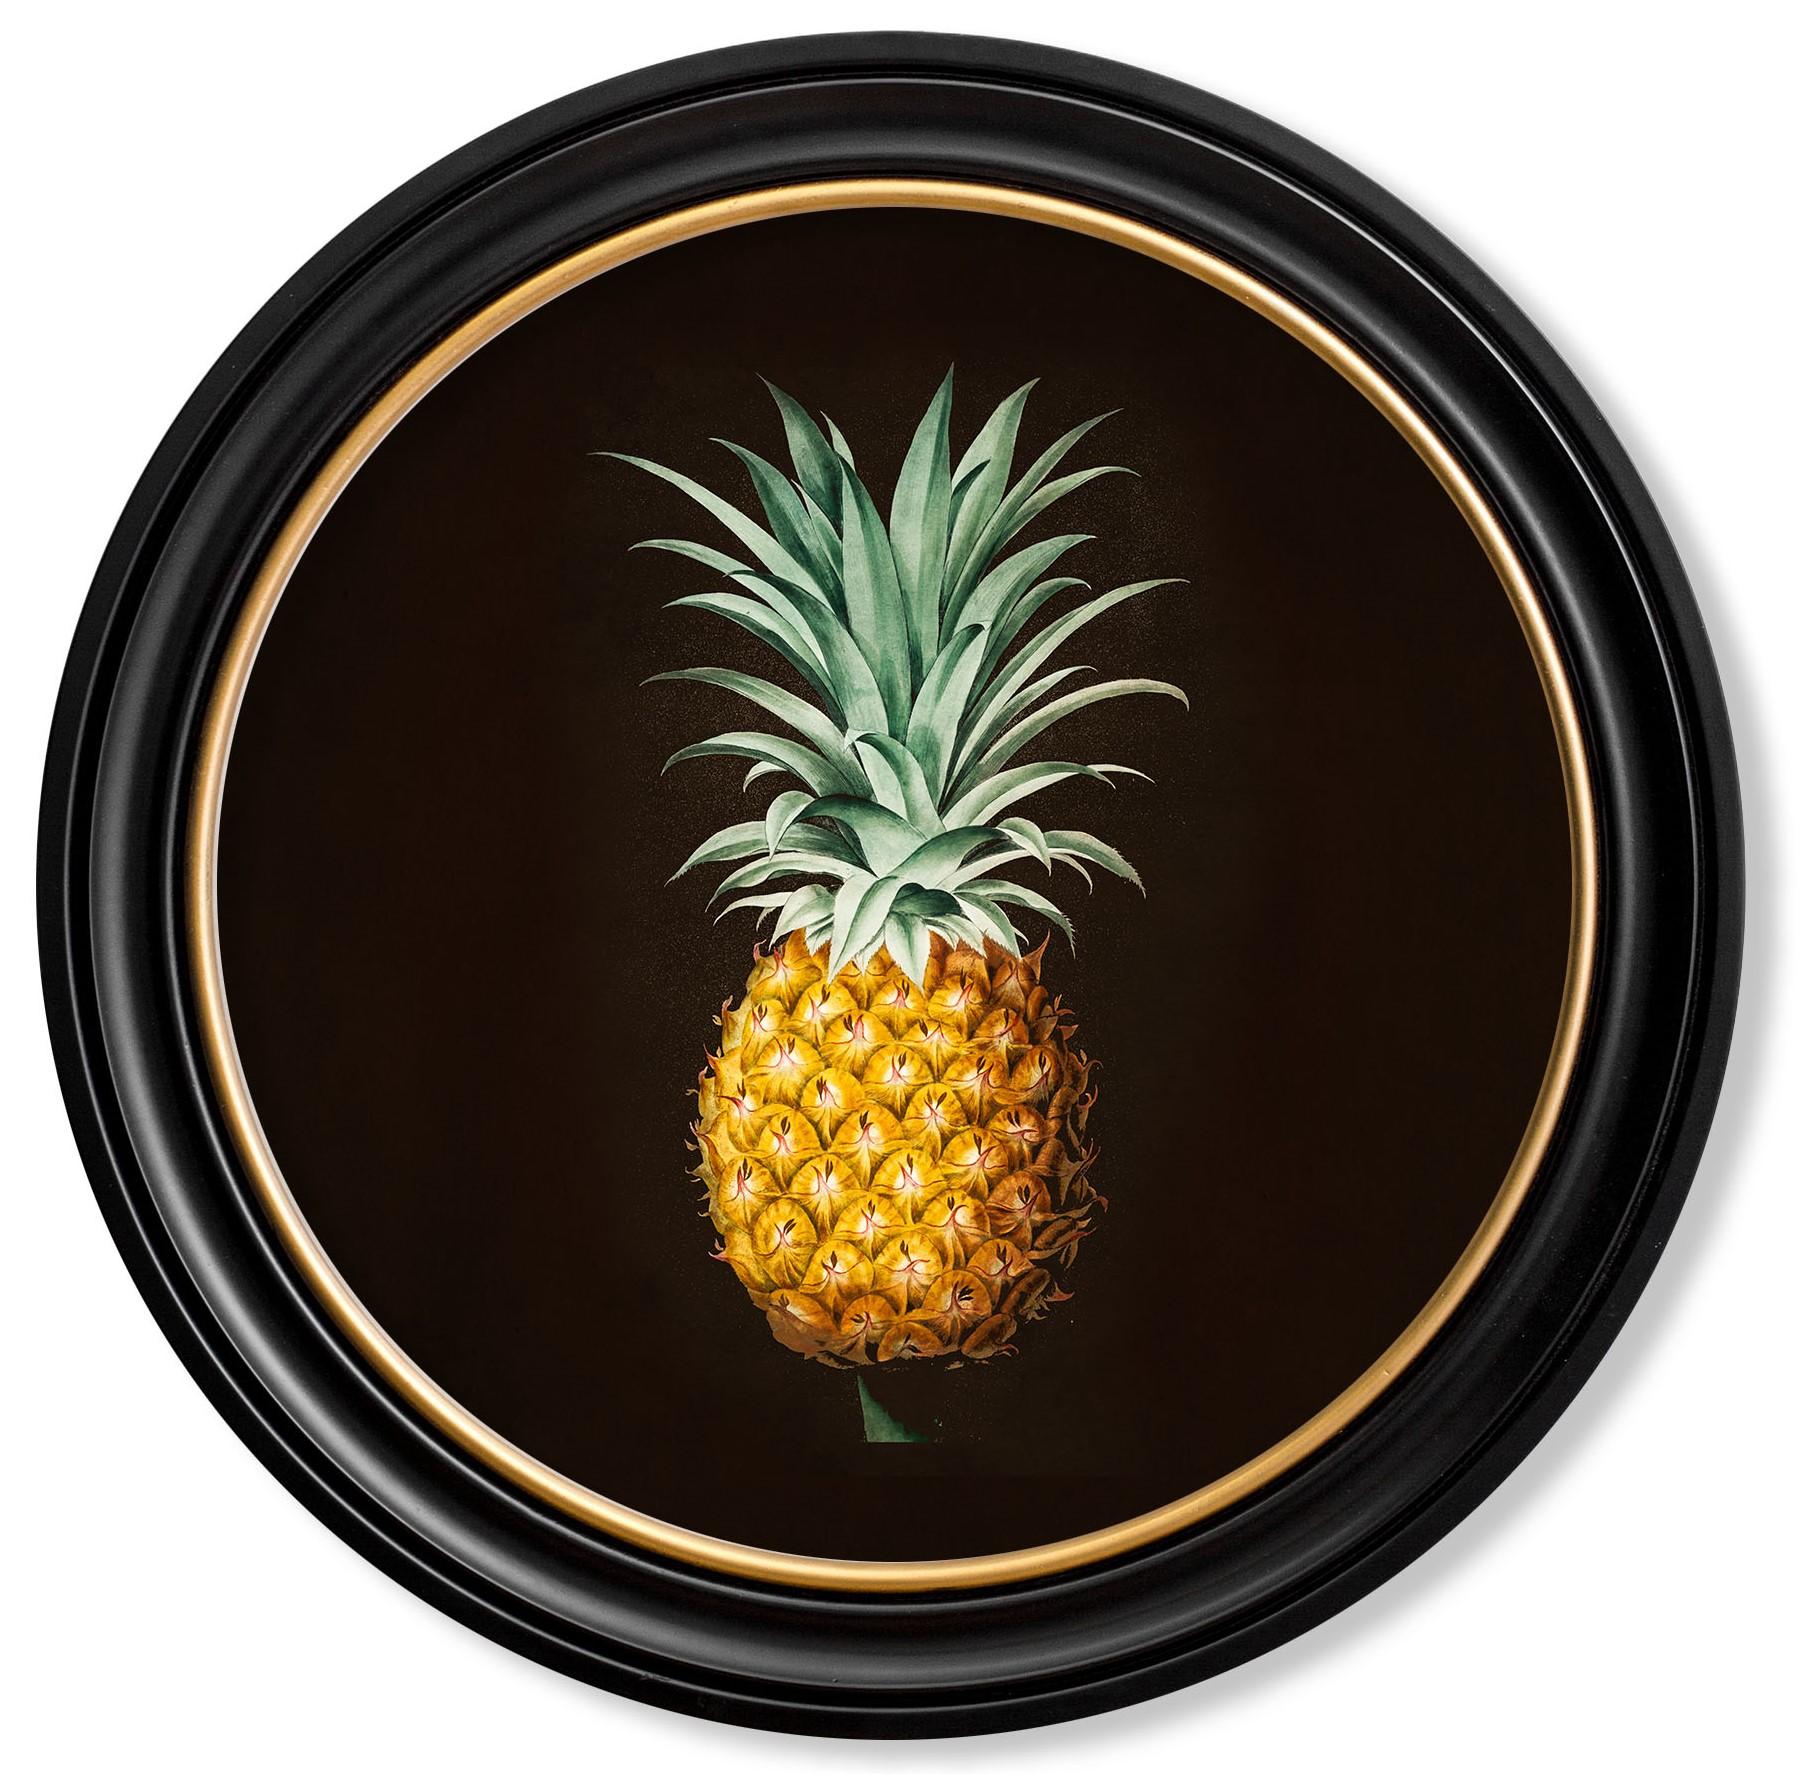 This is a delightful round framed print of a Pineapple study originally from a hand coloured early 19th Century French botanical illustration.

Prints of this style were originally printed in black and white and then hand painted over the top to